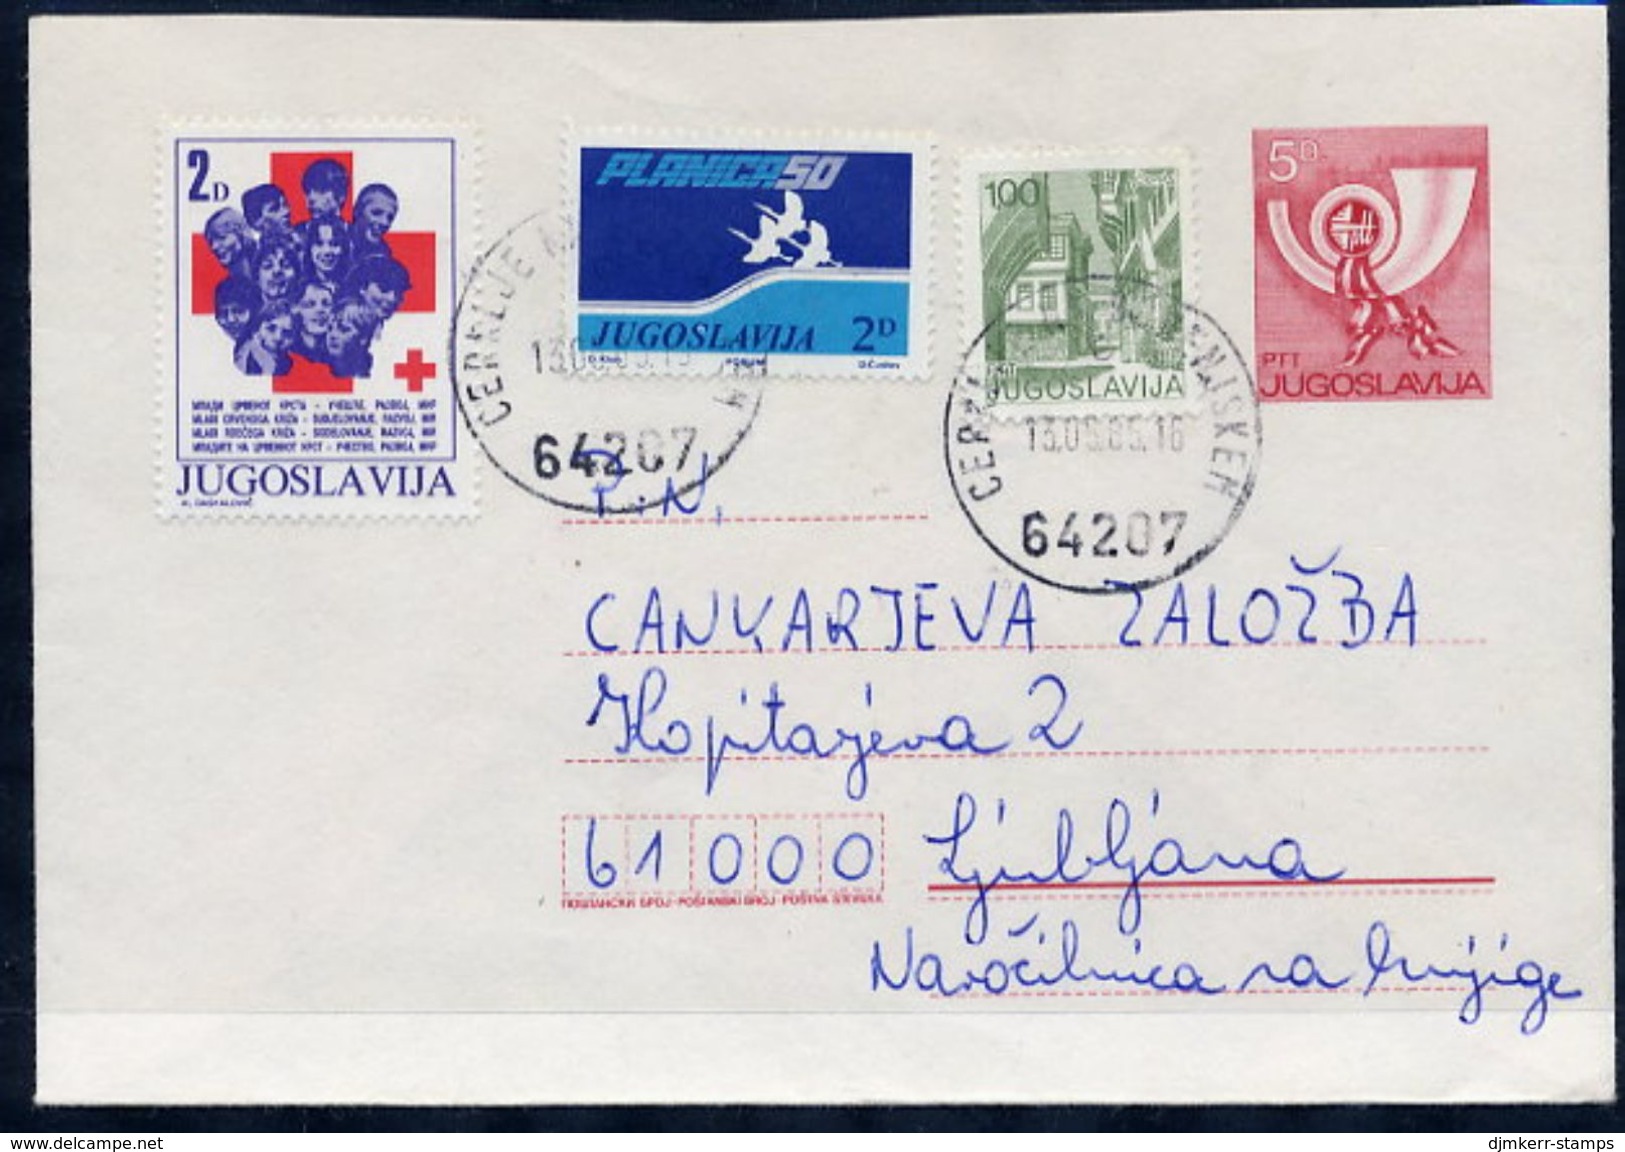 YUGOSLAVIA 1983 Posthorn 5 D.stationery Envelope Used With Additional Franking And Two Tax Stamps  Michel U72 - Ganzsachen